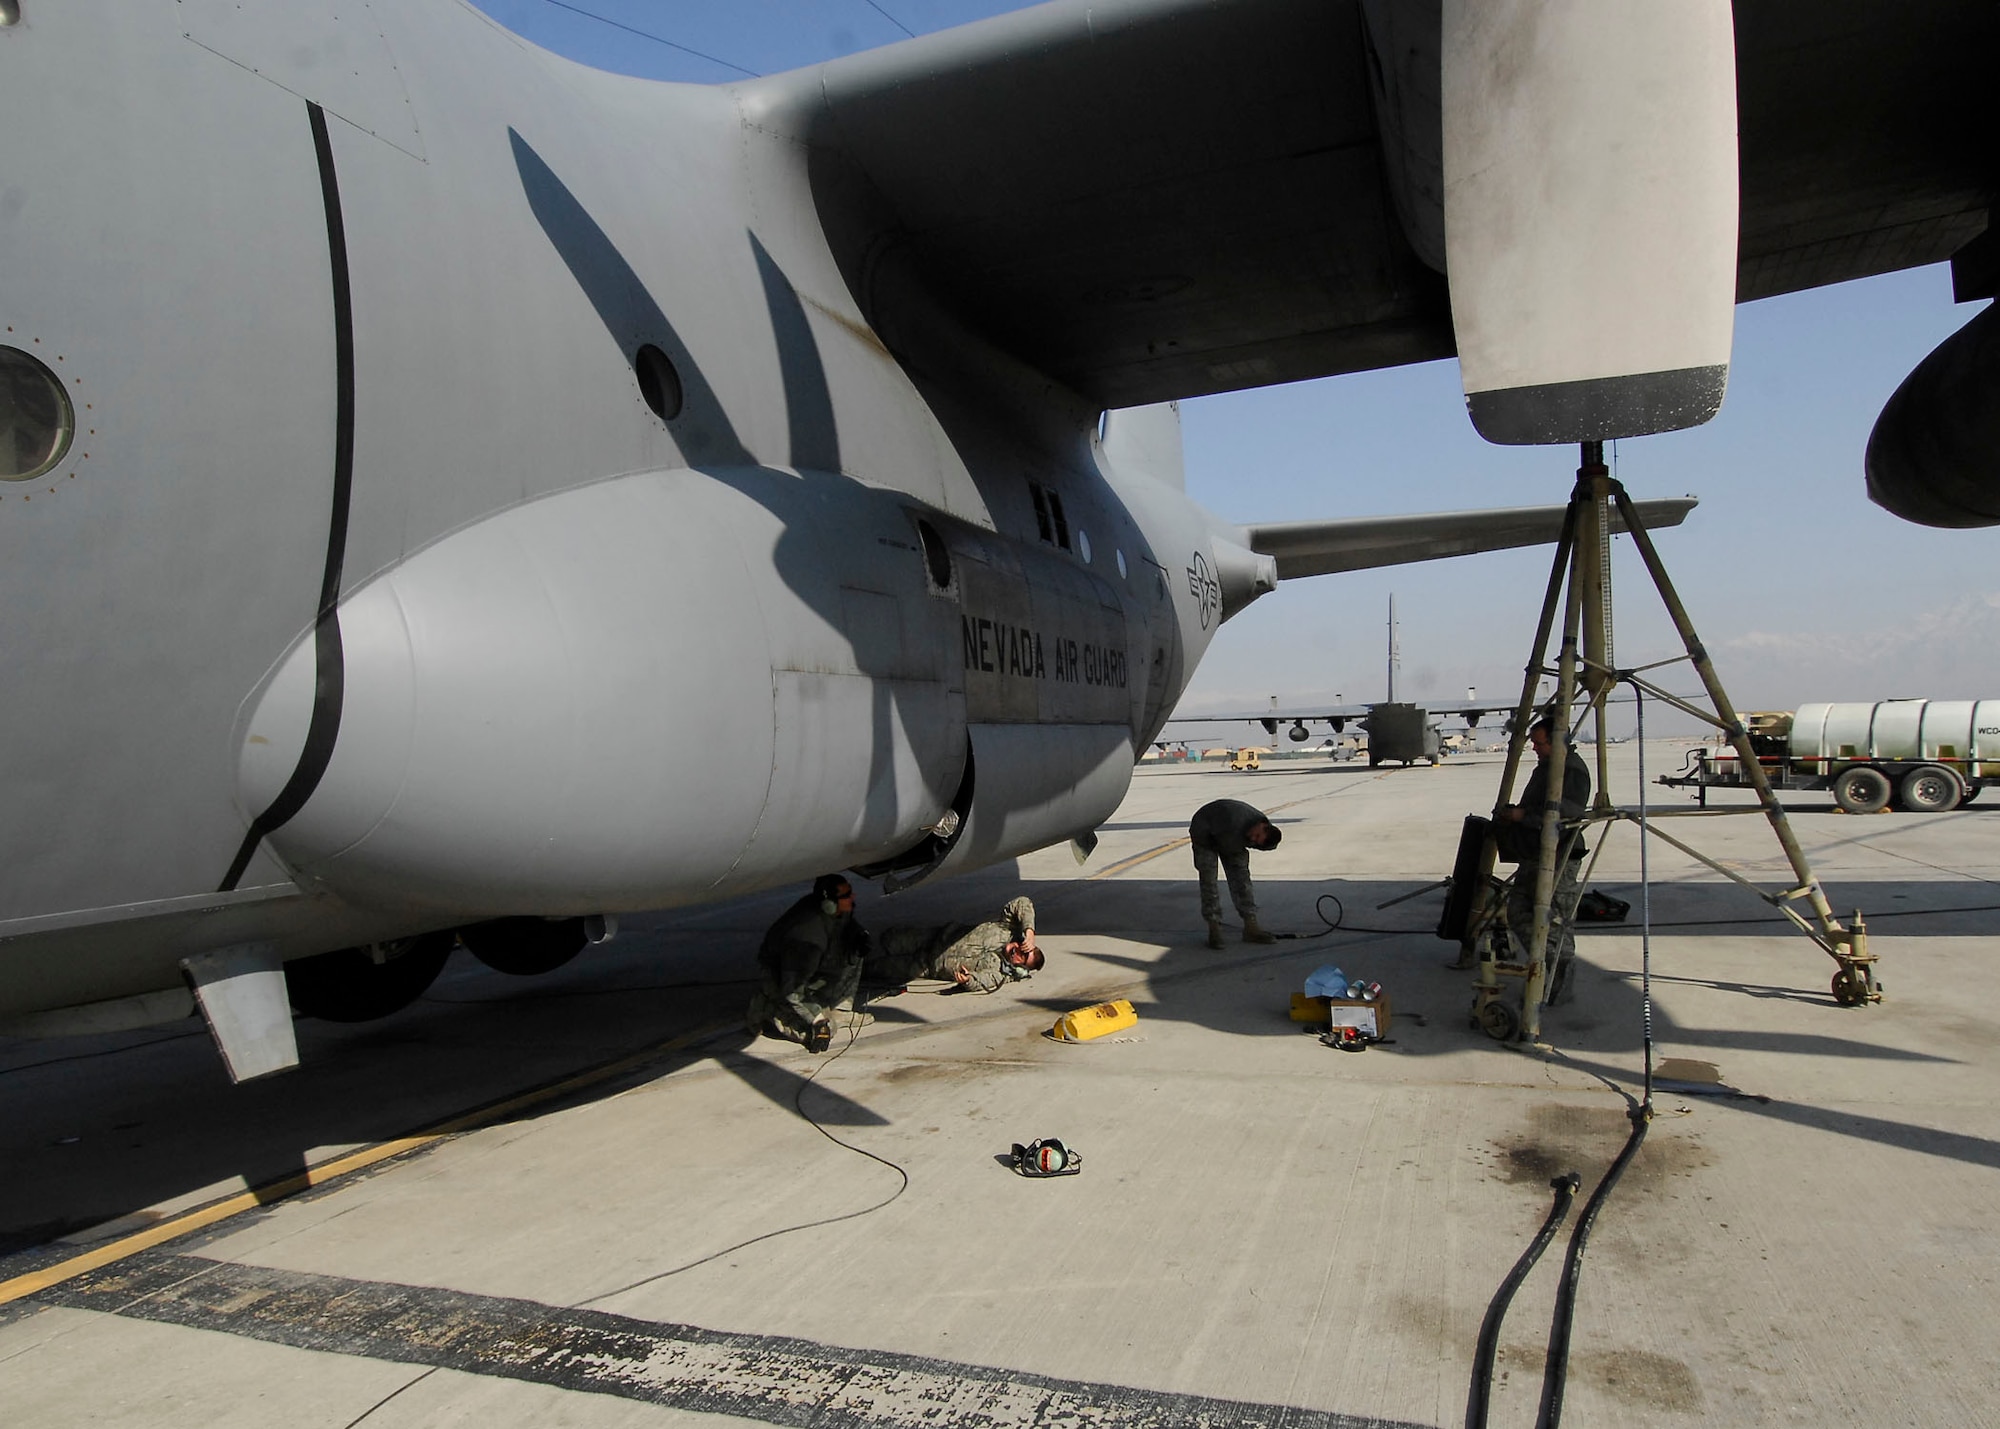 BAGRAM AIRFIELD, Afghanistan -- Crew chiefs from the 455th Expeditionary Aircraft Maintenance Squadron ensure the landing gear is working properly after performing maintenance on the C-130 Hercules, Dec. 7, 2009.  During an inspection on the aircraft the Airmen found a problem with the landing gear which they immediately fixed to keep the aircraft on time for future missions.  The Airmen are deployed from the Nevada Air National Guard's 152nd Airlift Wing.  (U.S. Air Force photo/Senior Airman Felicia Juenke)